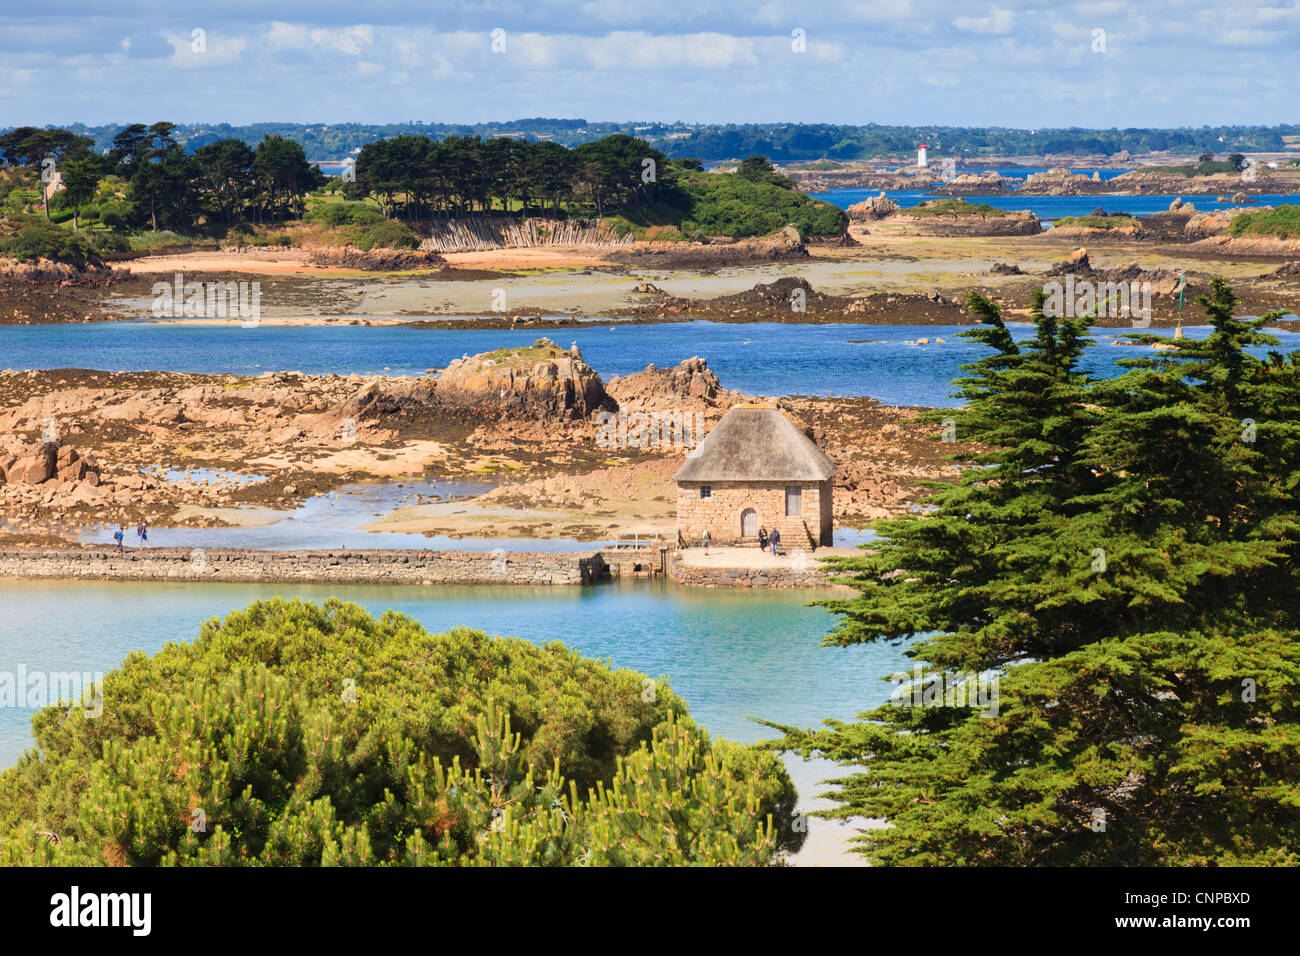 View over Ile de Brehat from Chapel St Michel, with the Birlot tidal mill. Stock Photo